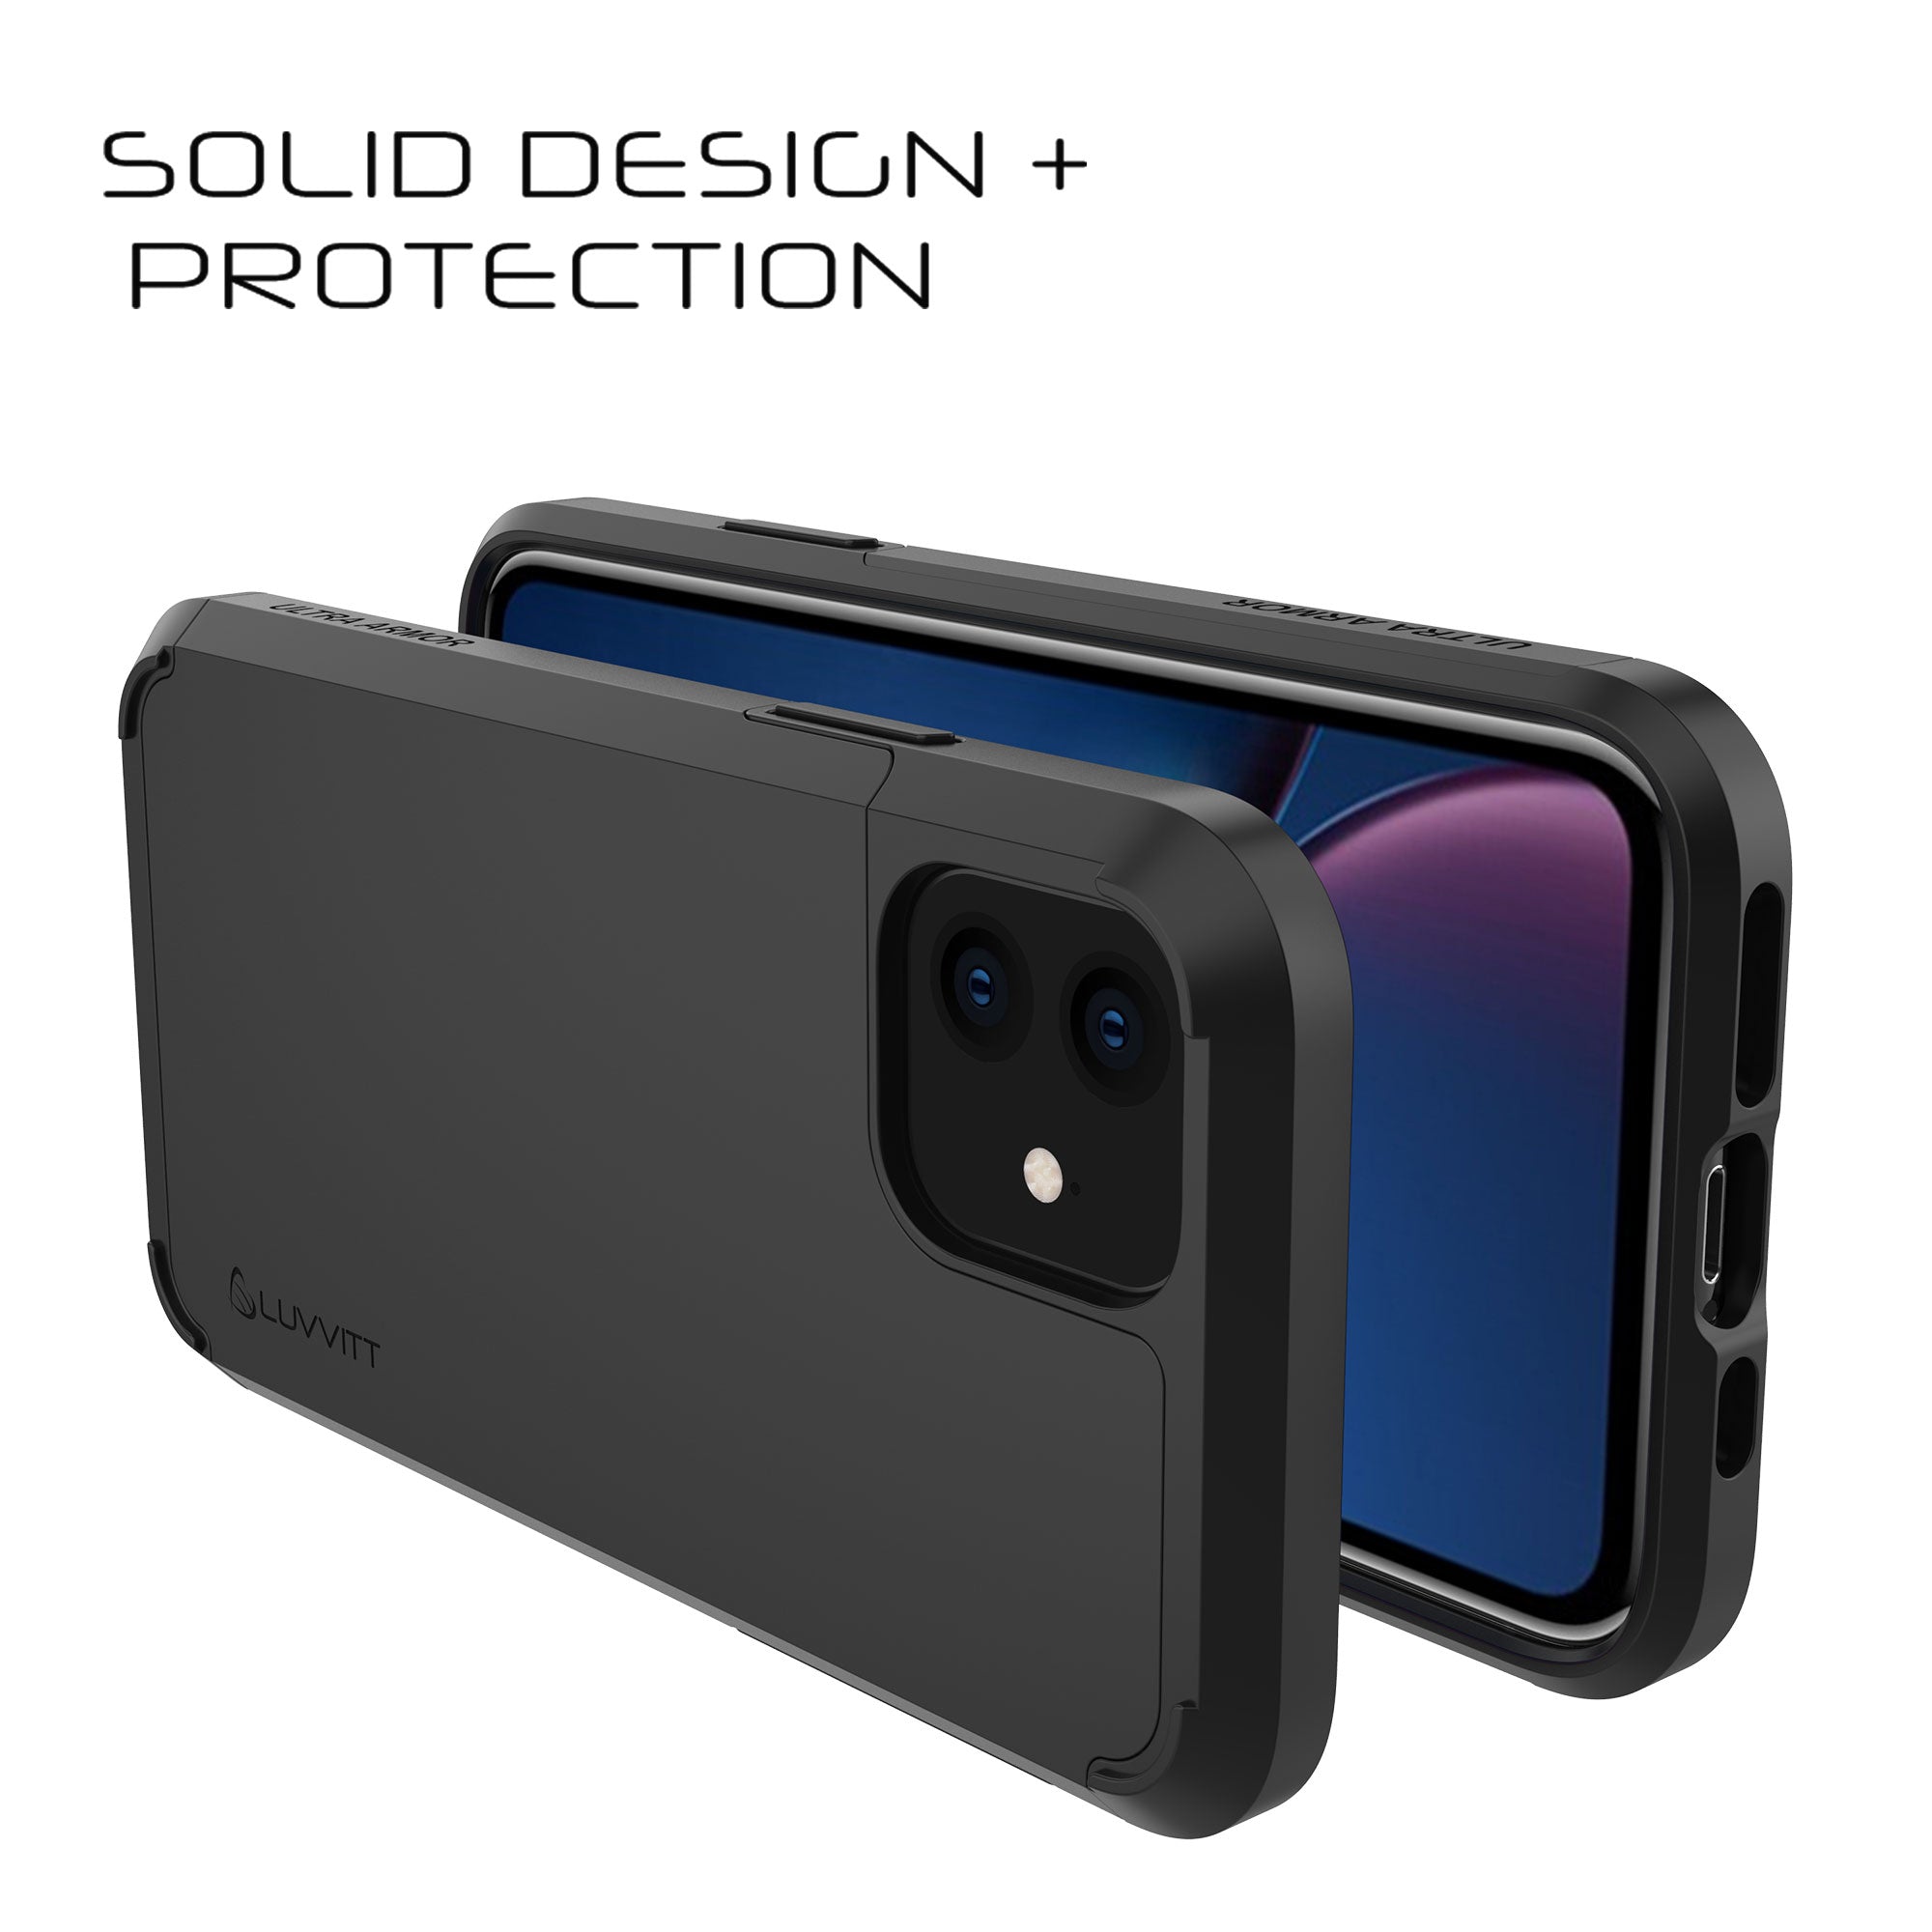 Luvvitt Ultra Armor Case and Tempered Glass Screen Protector Bundle for iPhone 11 2019 - Black